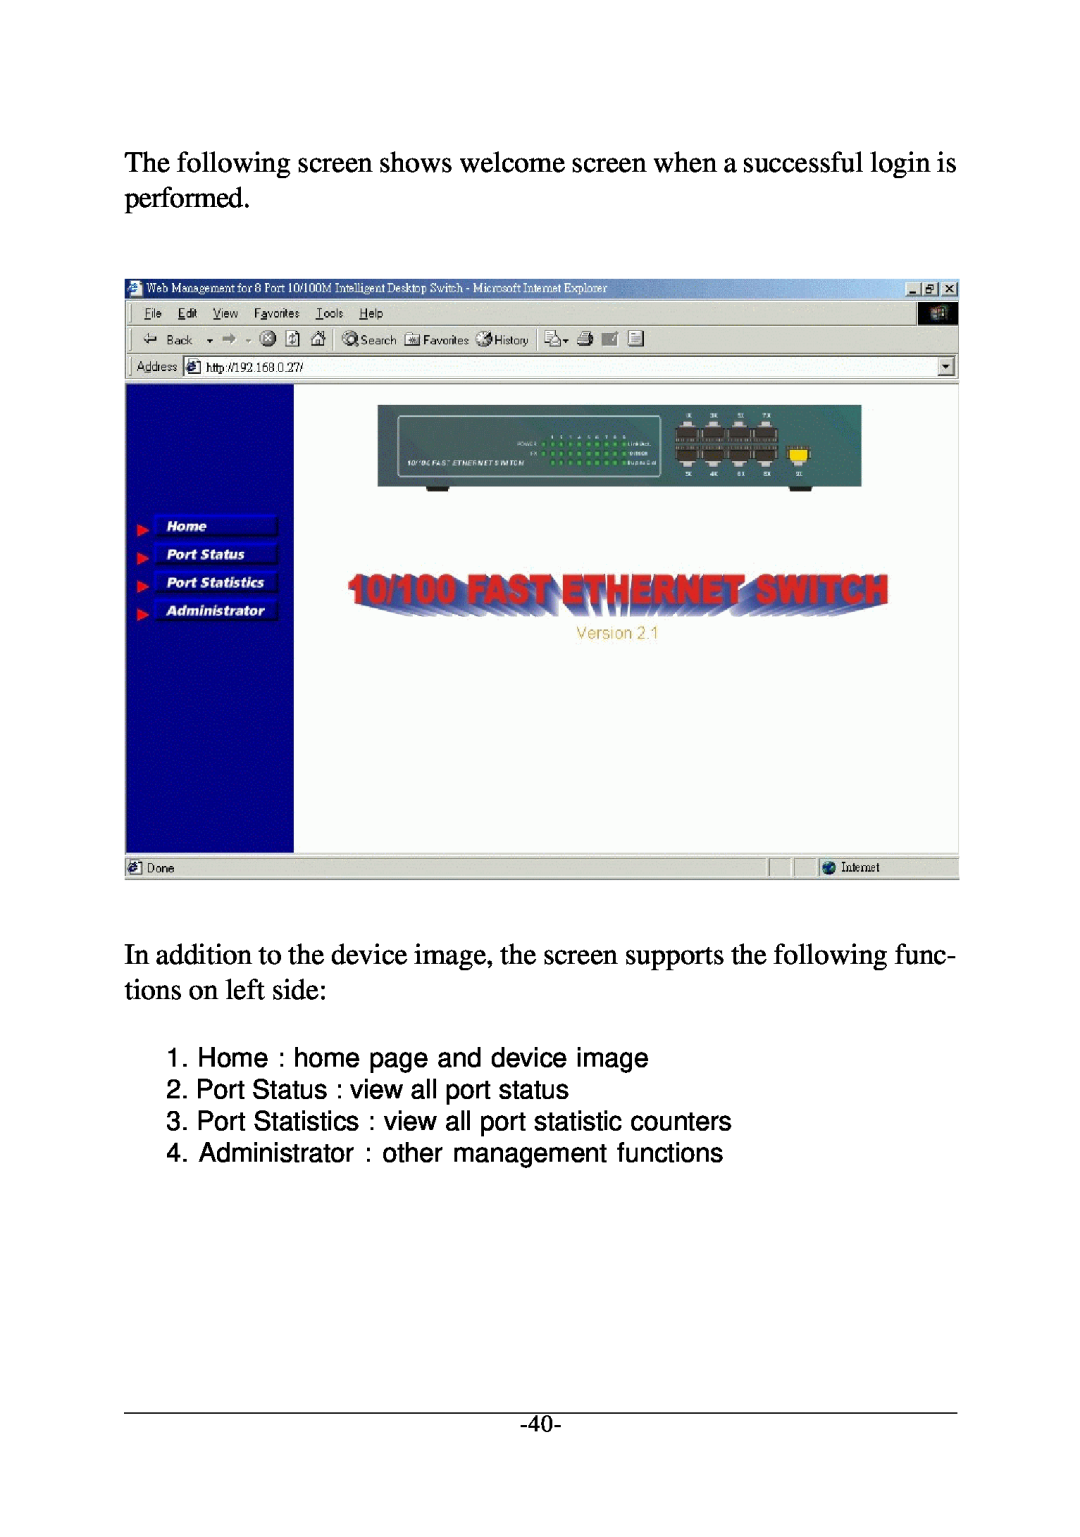 Xerox KS-801 Home home page and device image, Port Status view all port status, Administrator other management functions 